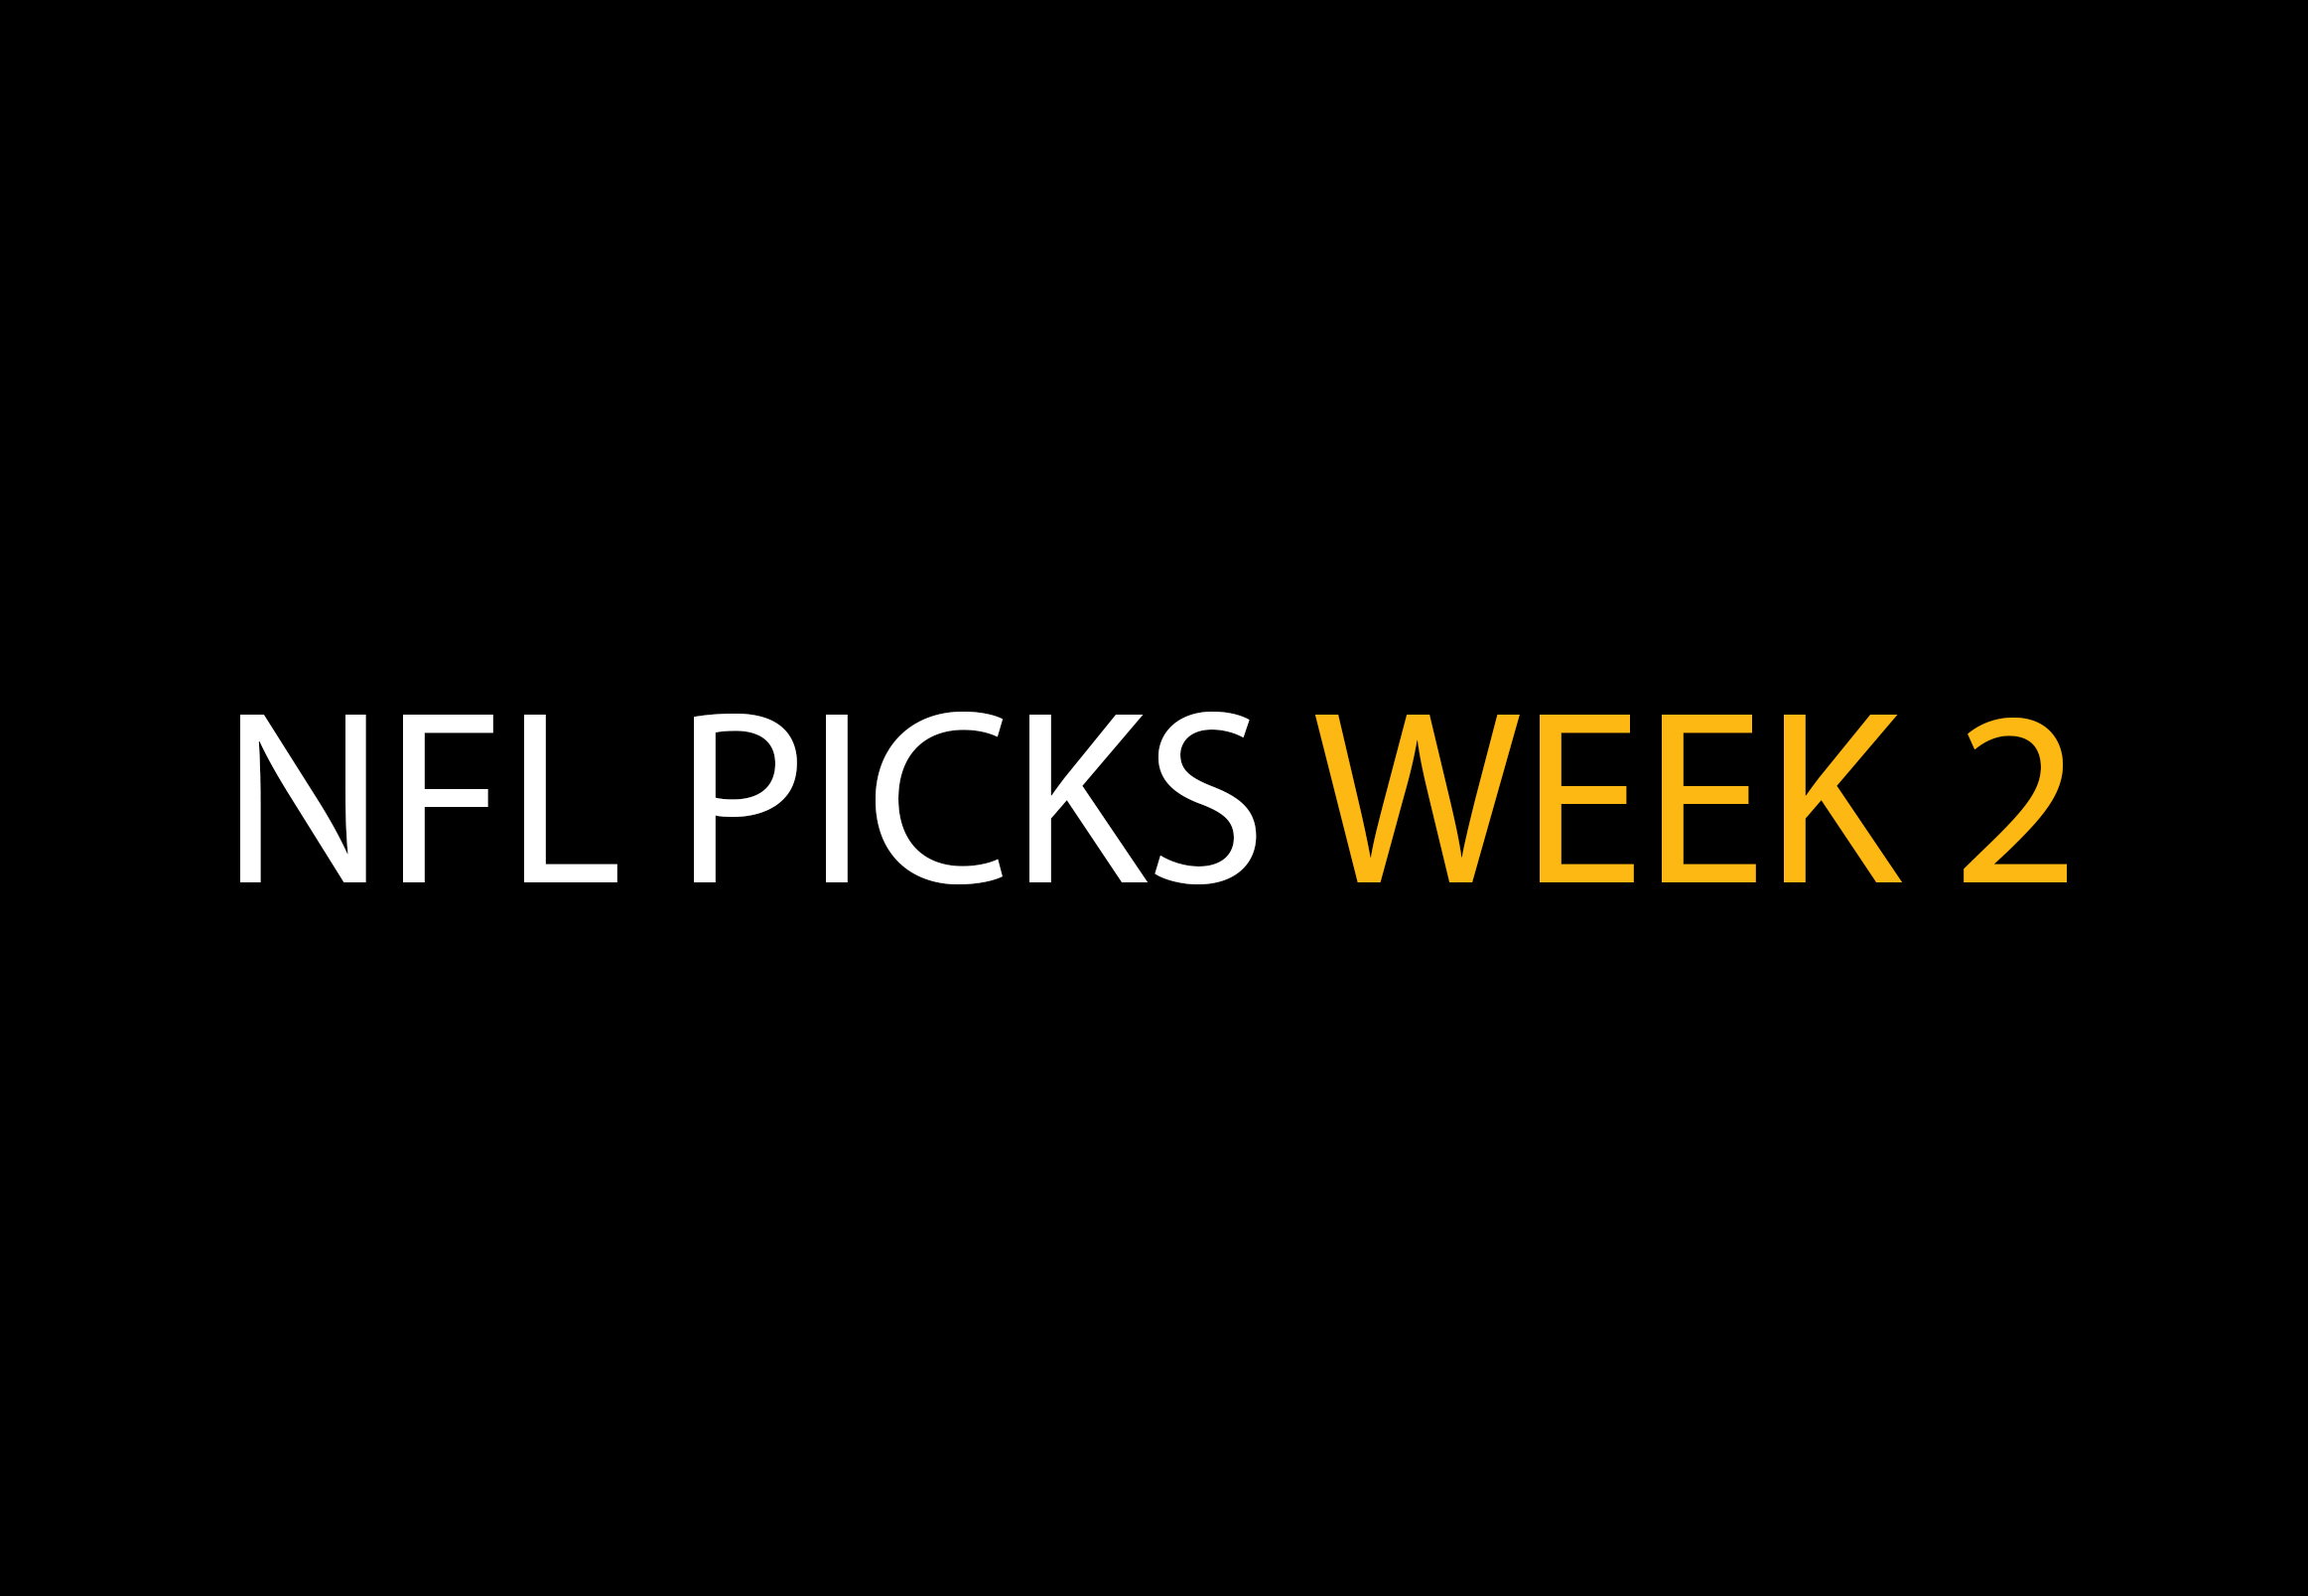 NFL Picks Week 2 - Picks, Predictions and Against the Spread